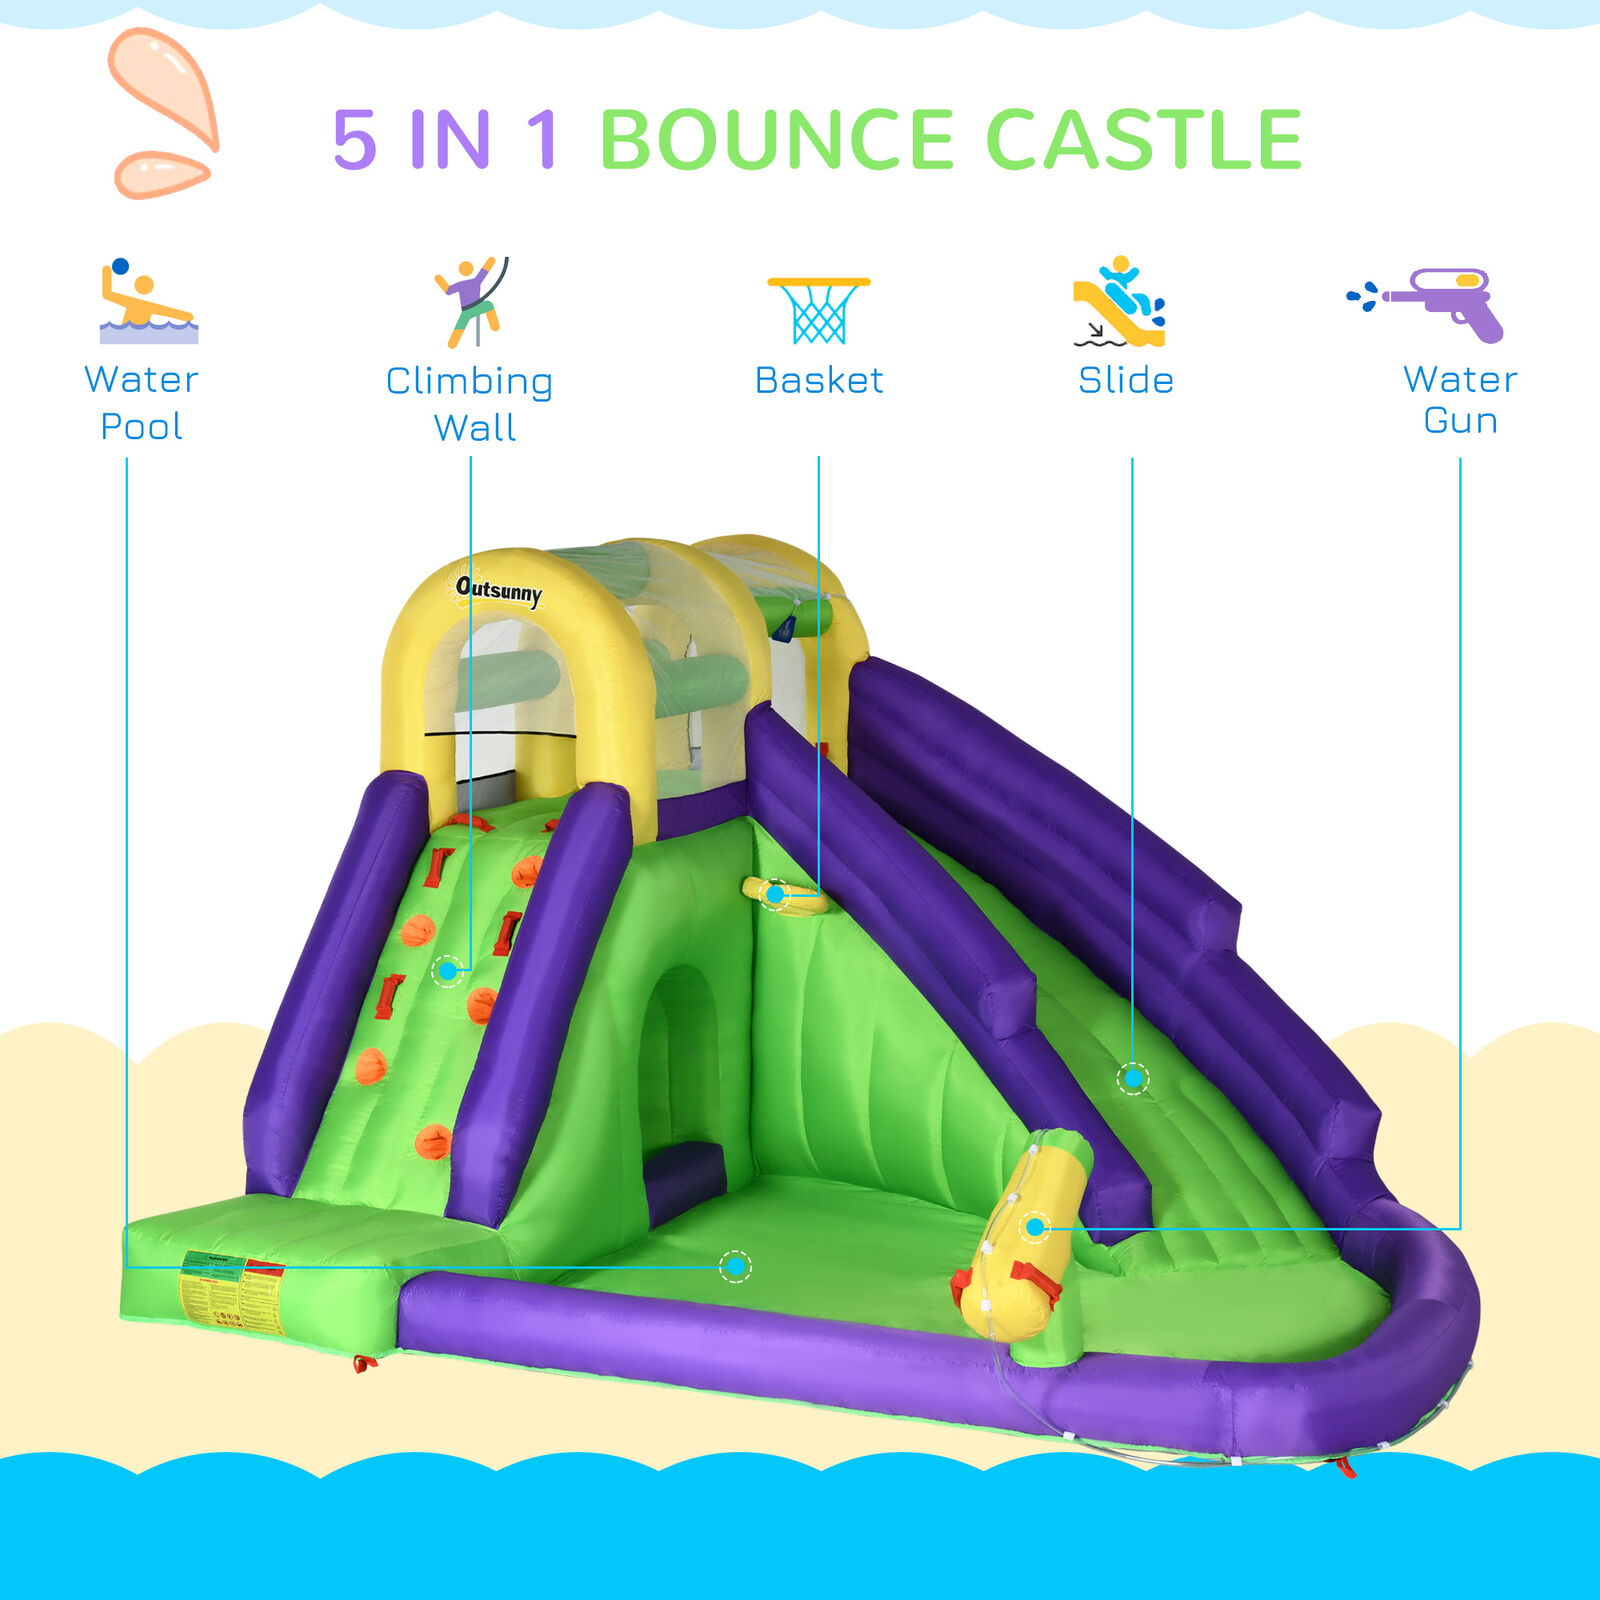 Outsunny Kids Inflatable Water Slide Bounce Jumping Castle with Inflator Bag Patches